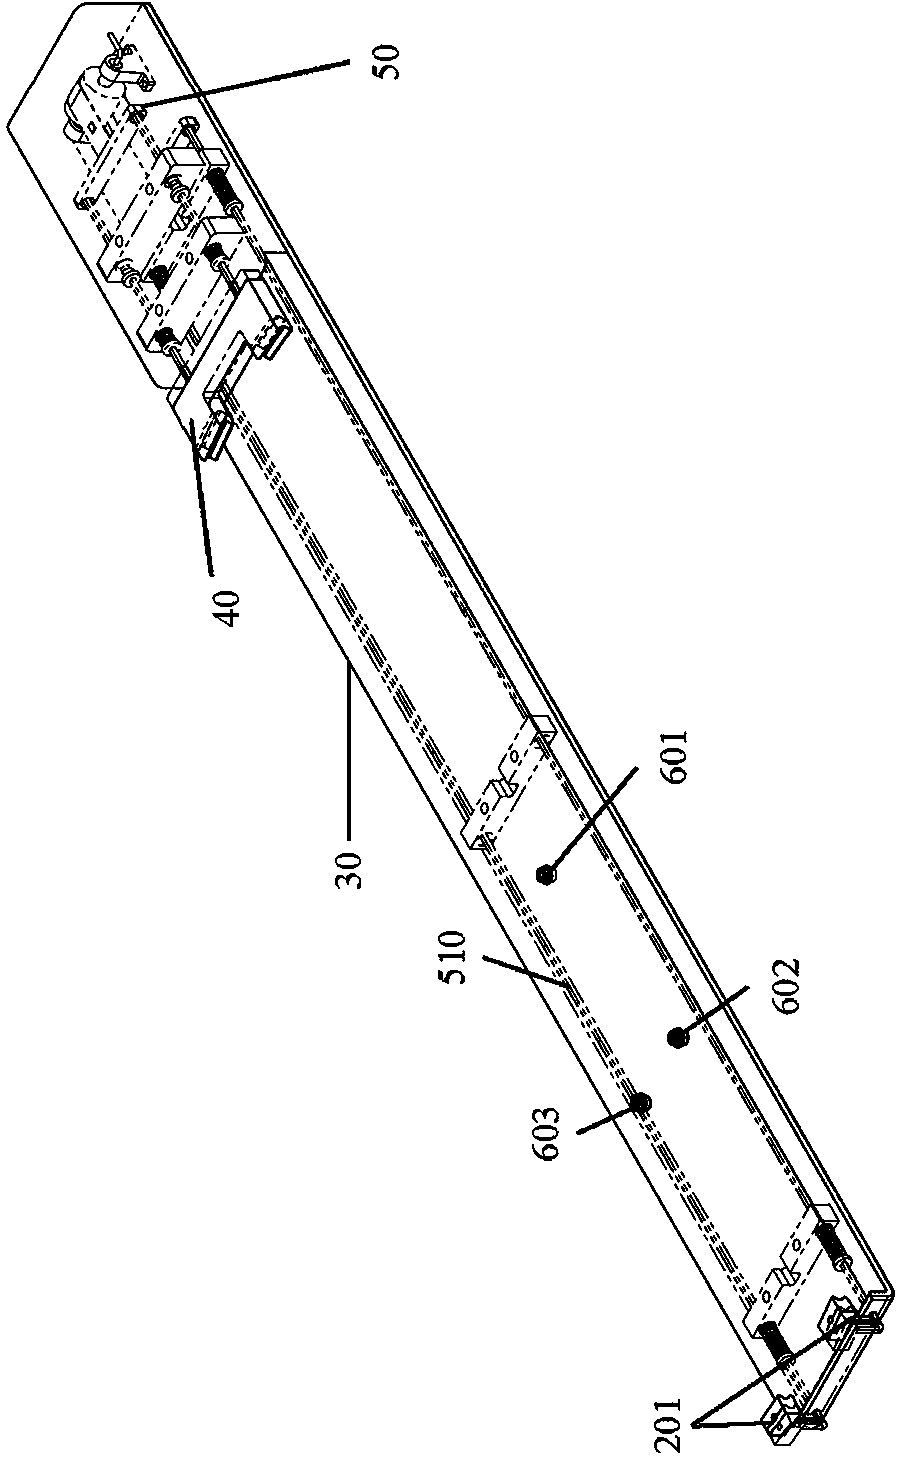 Wafer clamping device utilizing spring tensioning force feedback and motor driving force feedback